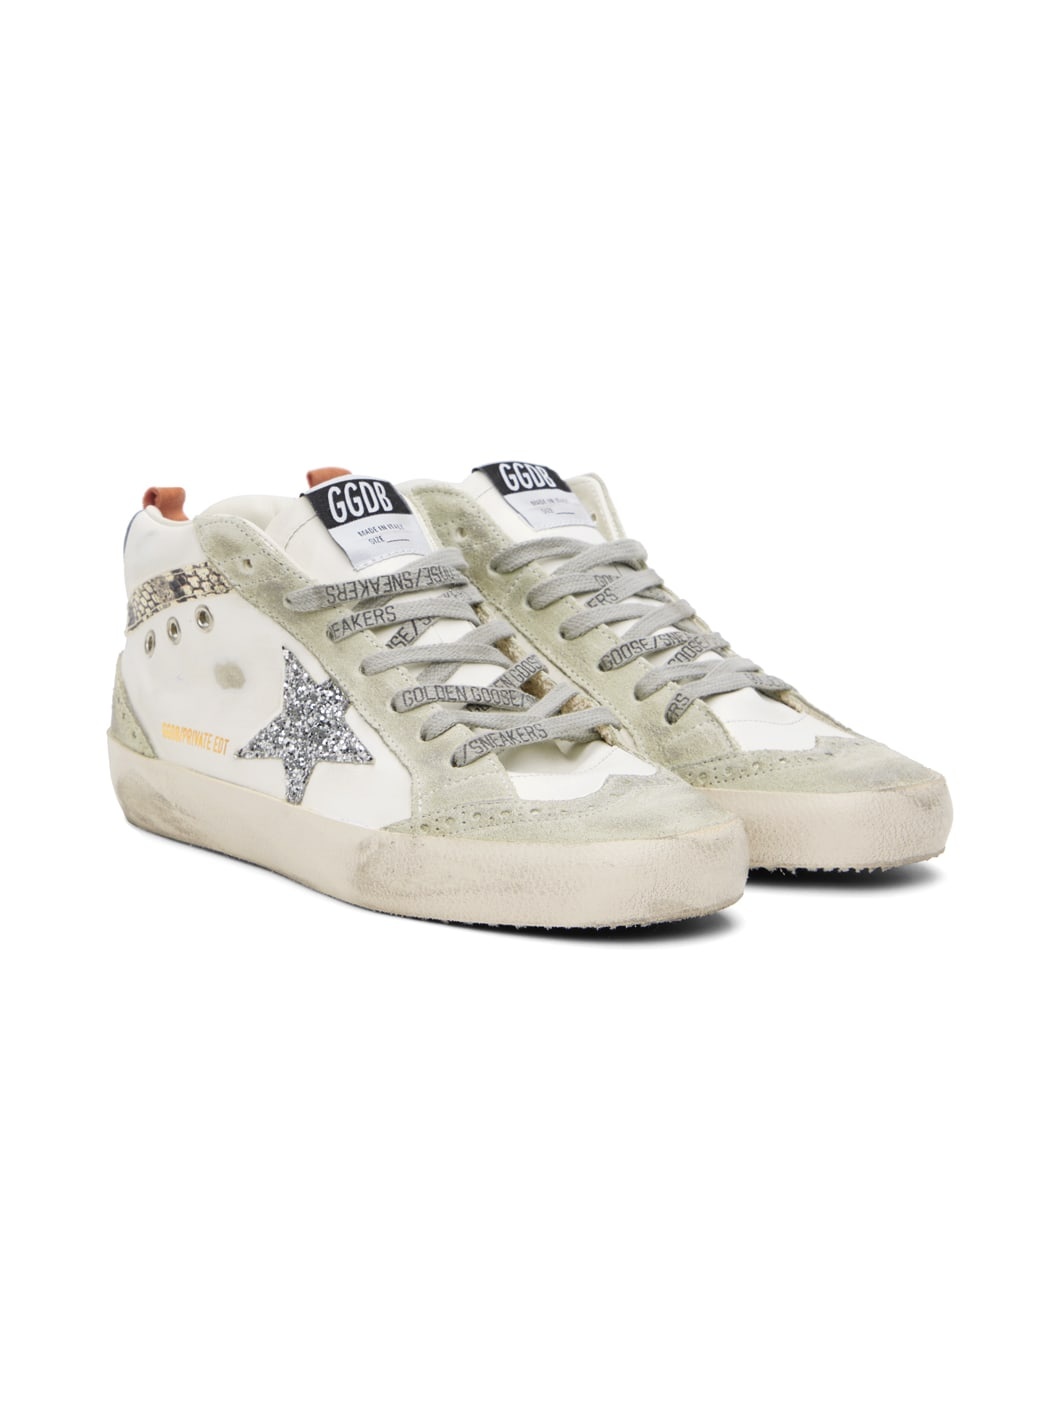 SSENSE Exclusive White & Gray Mid Star Sneakers - 4